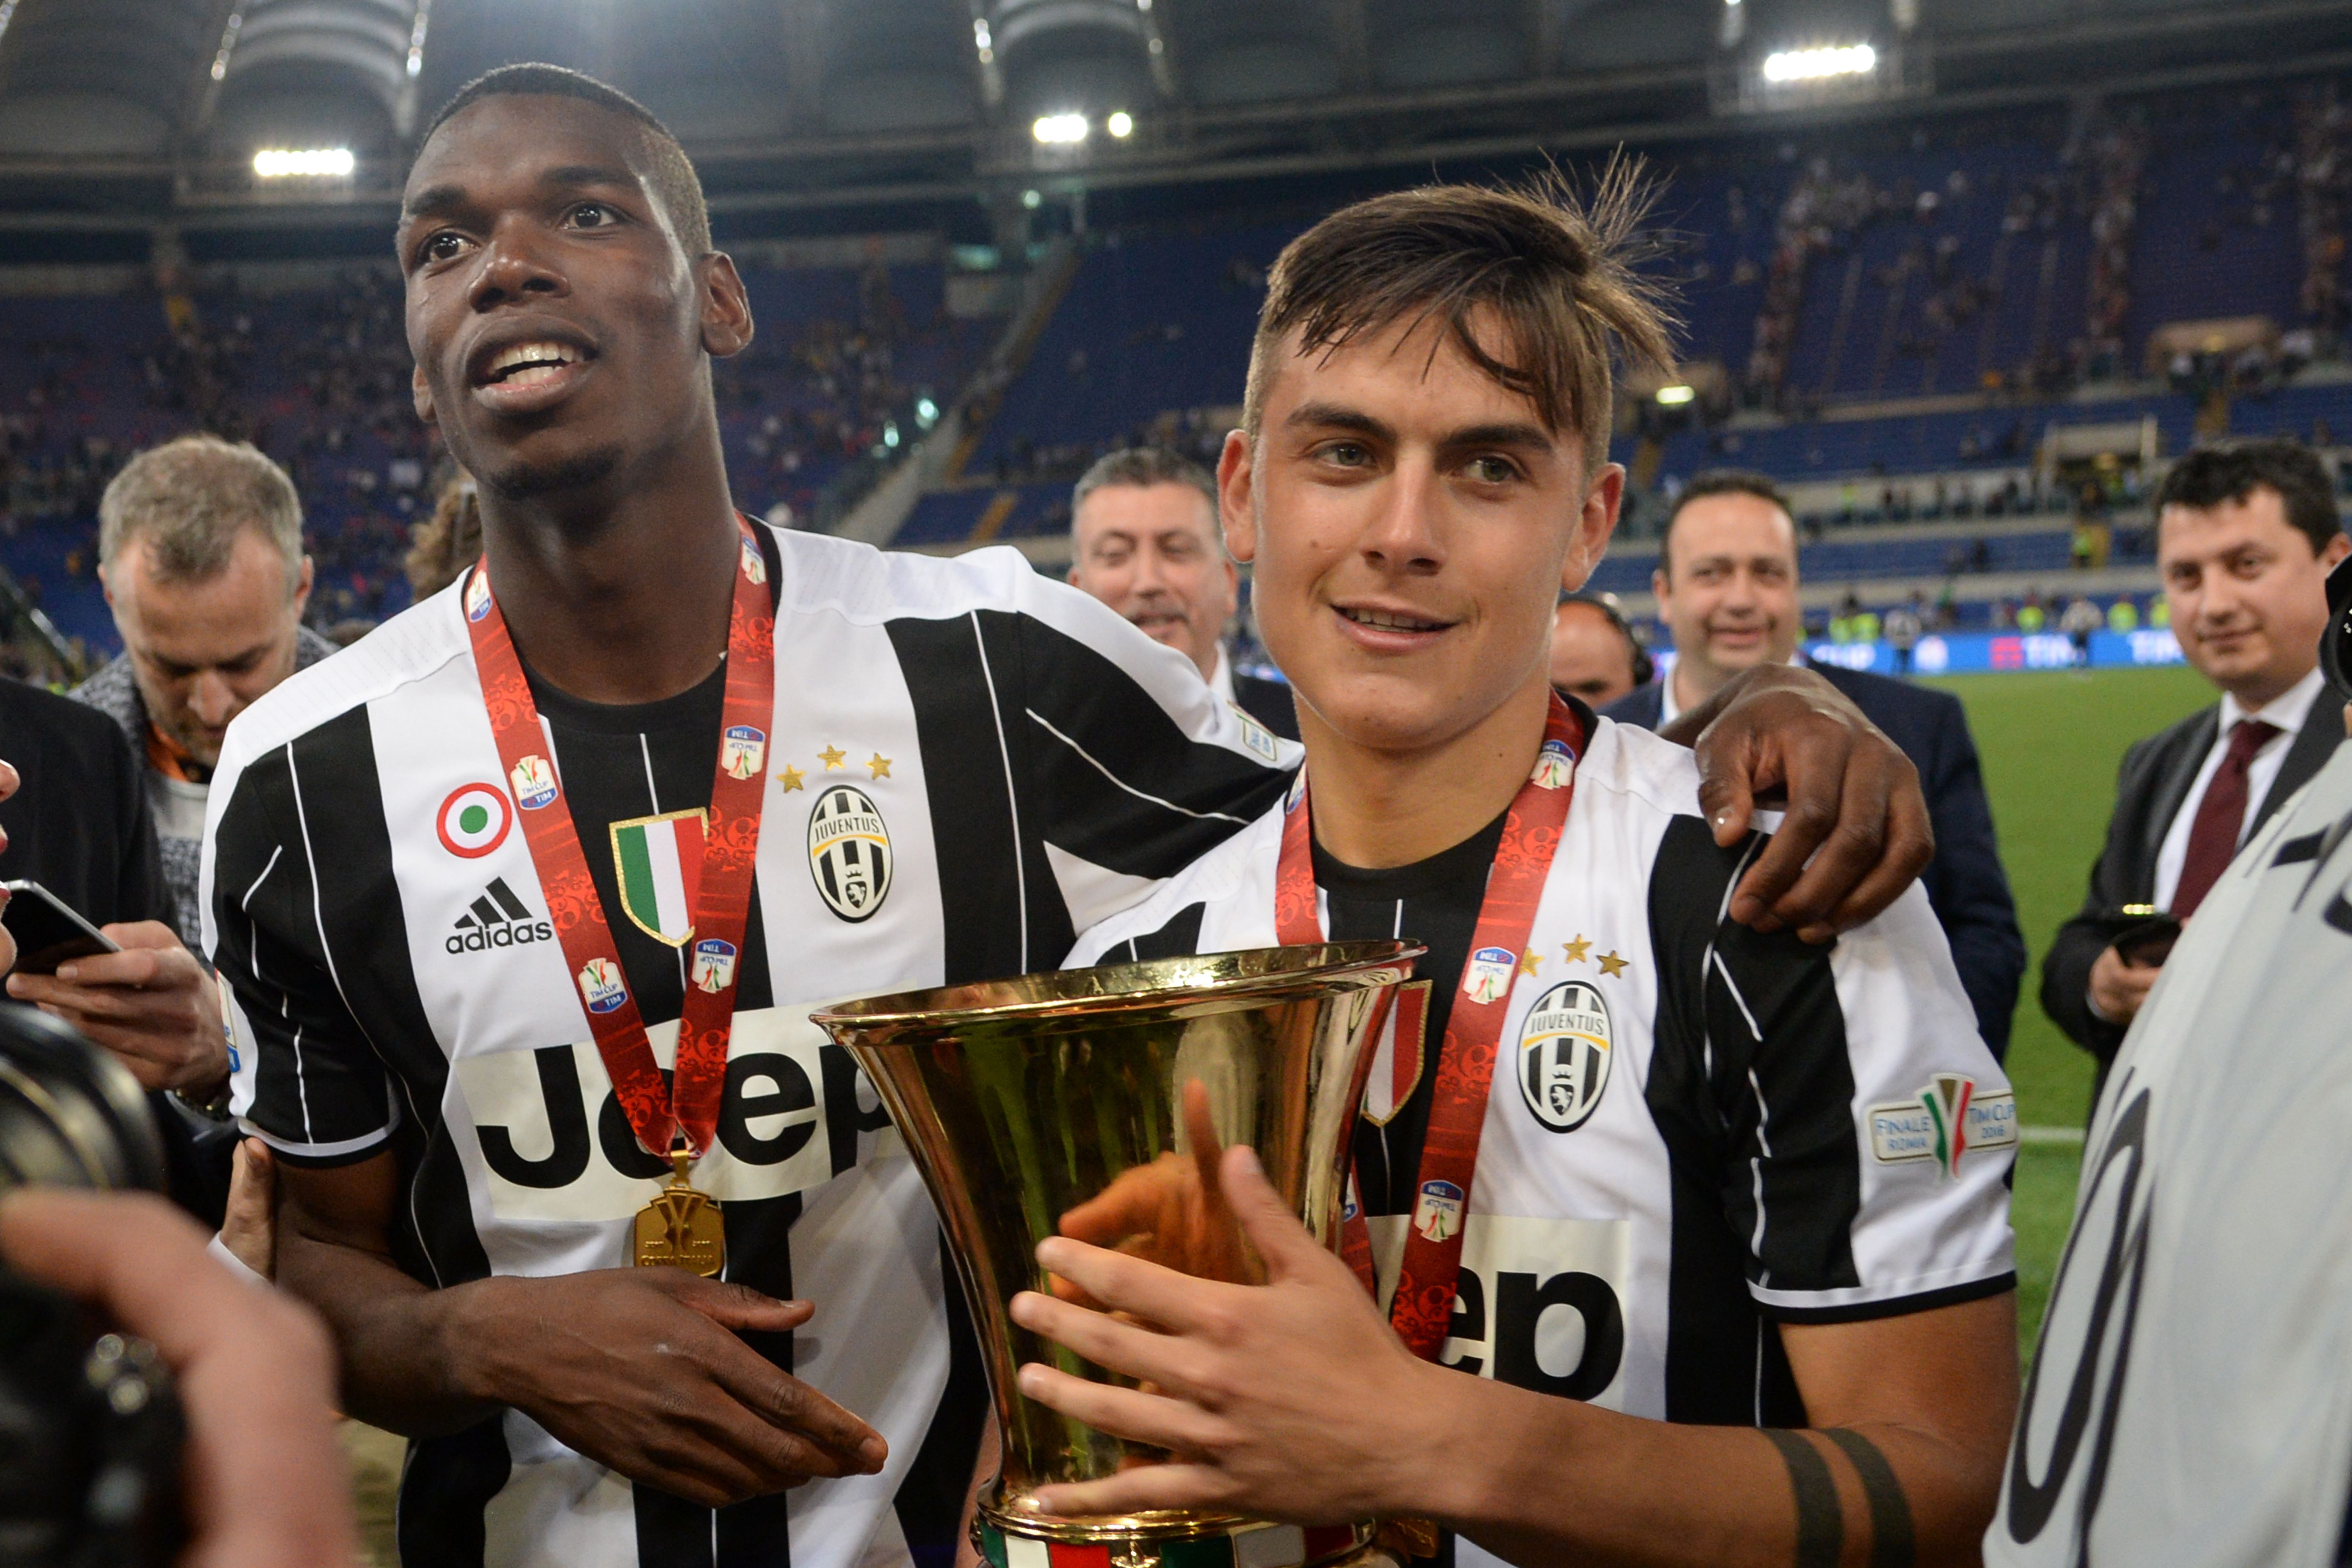 Paulo Dybala "Pogba is staying for certain"